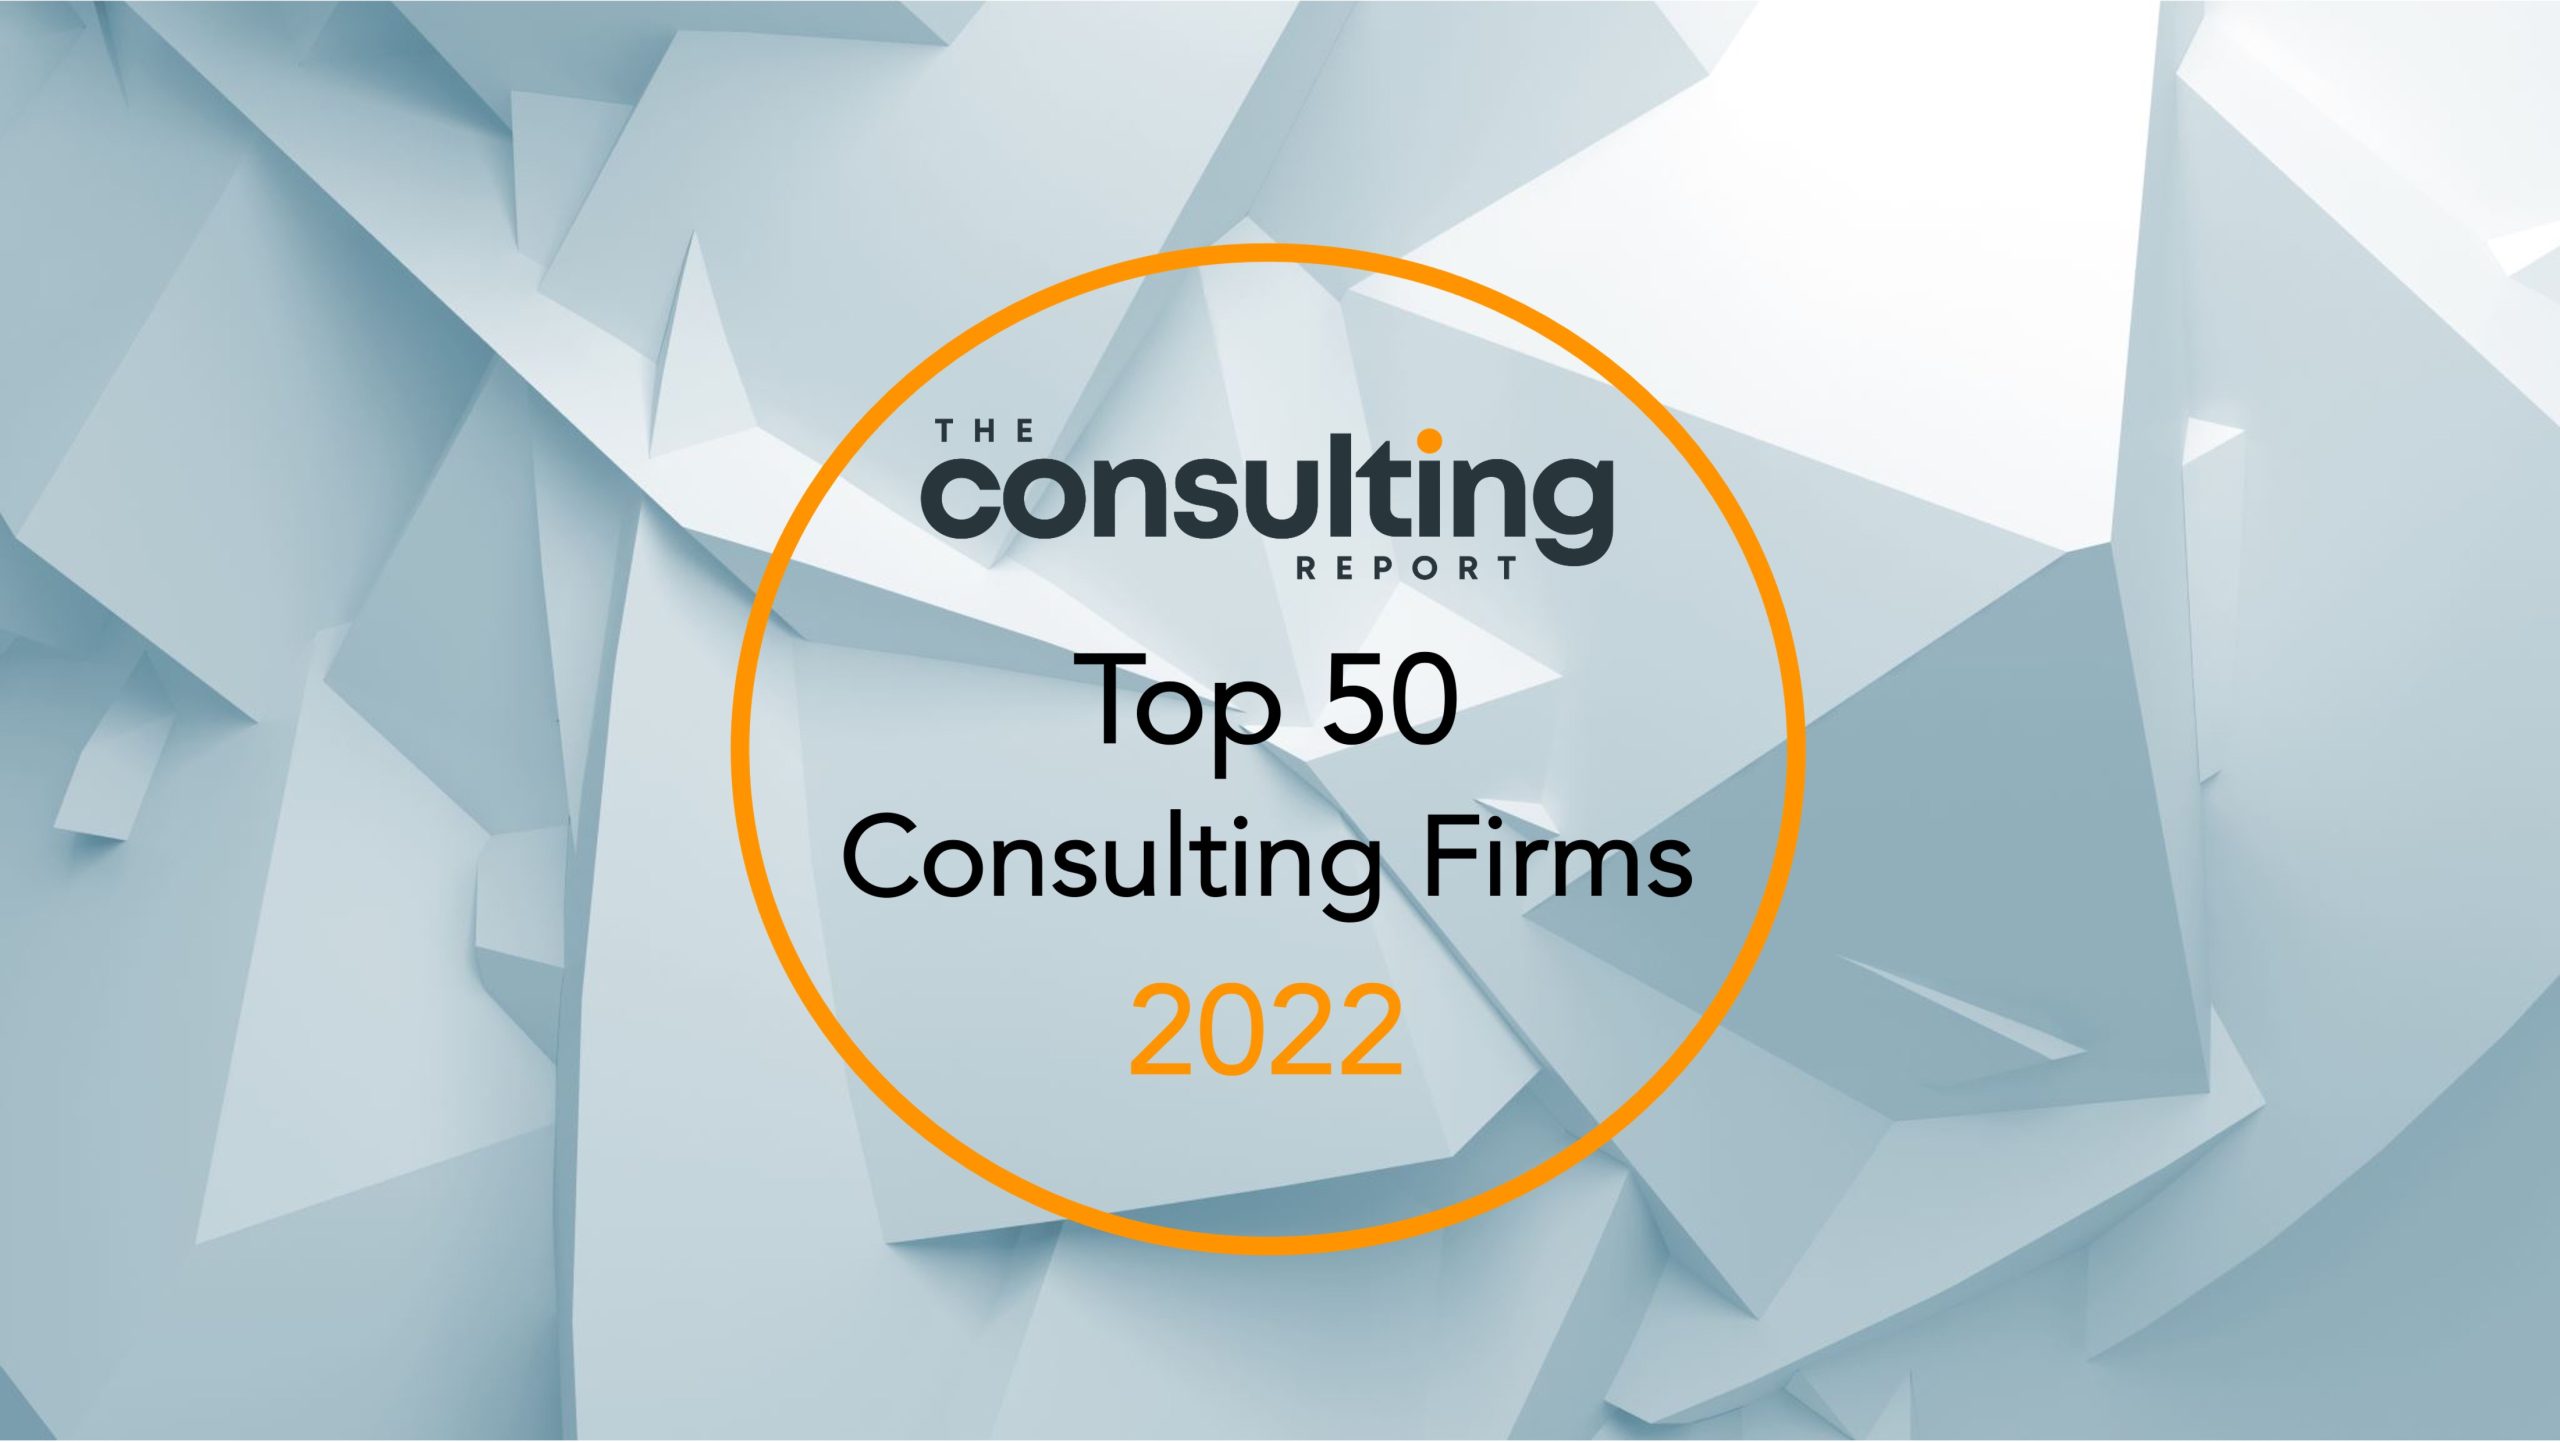 Ride svinge Taktil sans The Top 50 Consulting Firms of 2022 | The Consulting Report